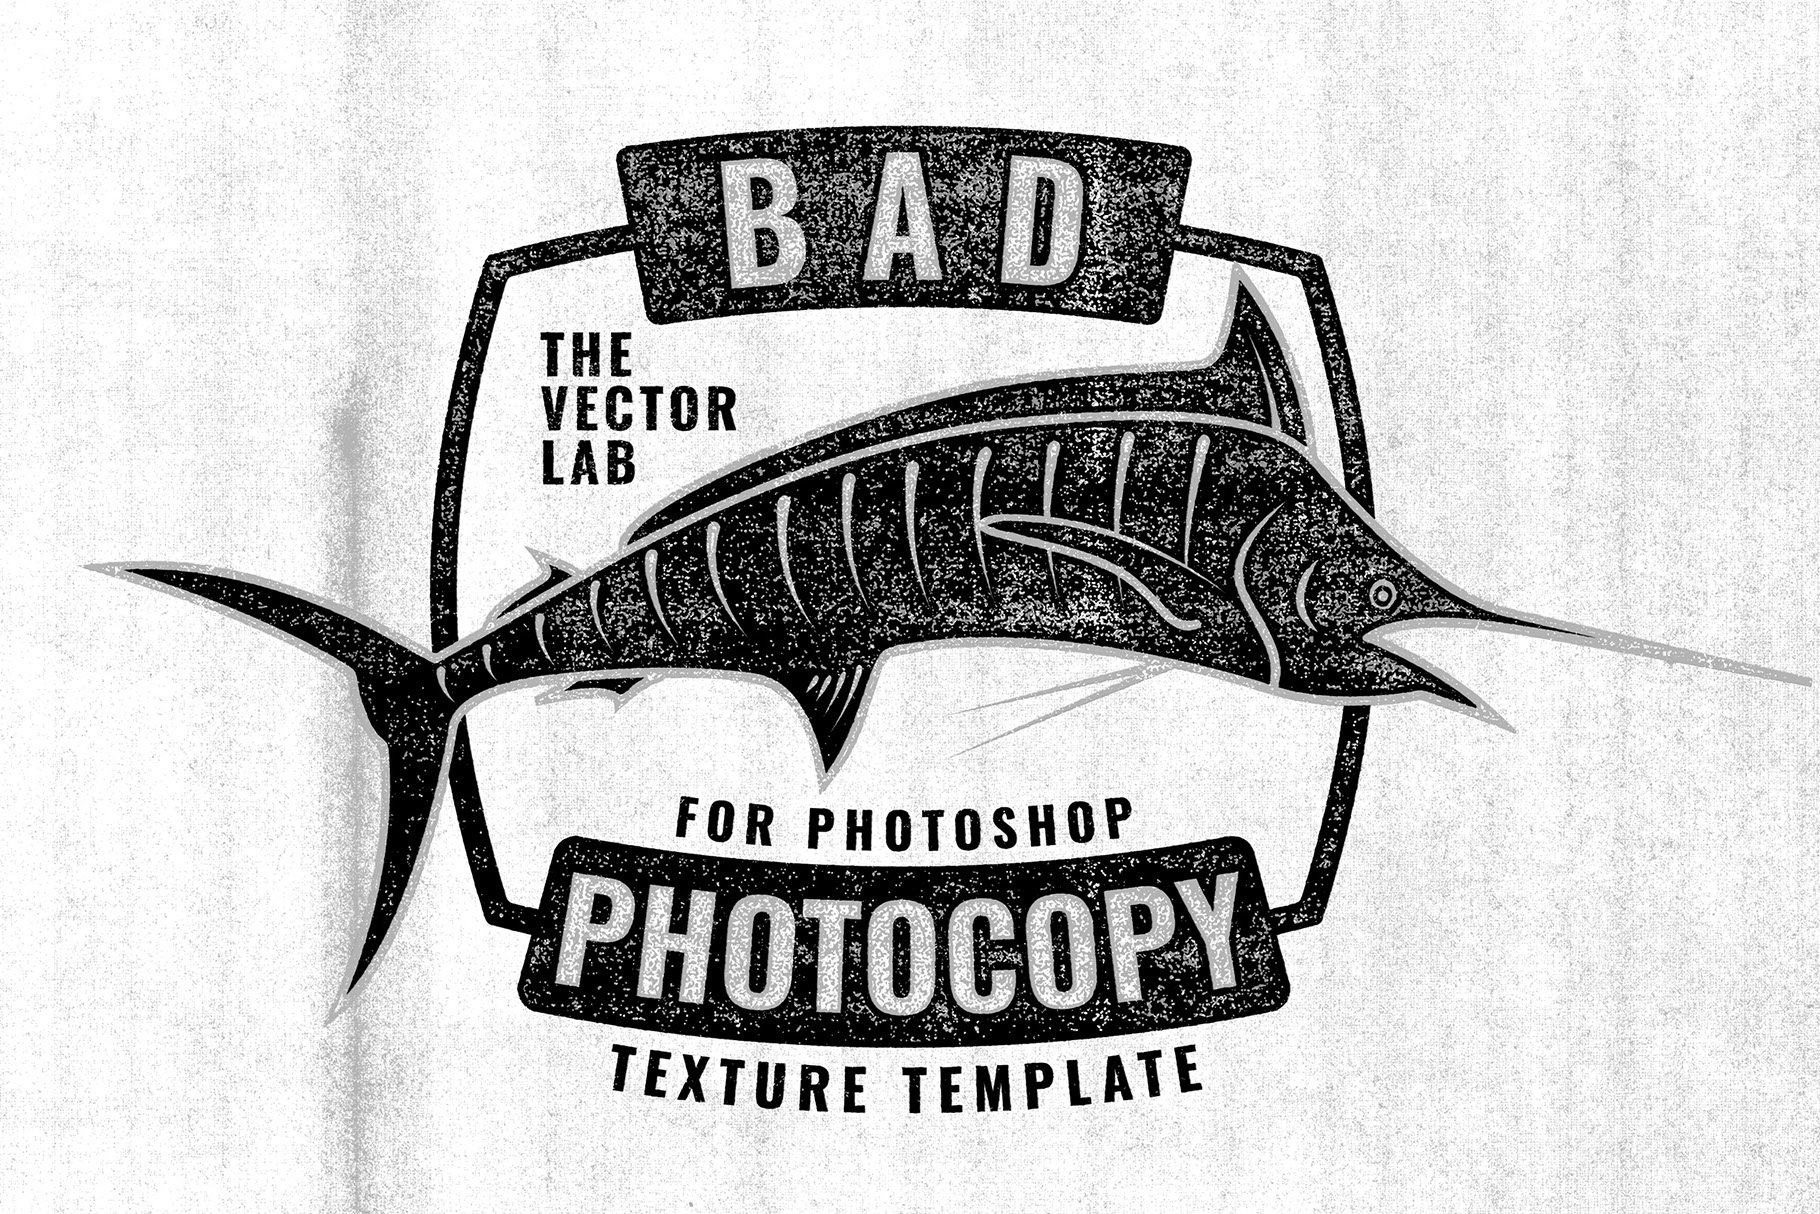 Bad PhotoCopy Texture Templatepreview image.